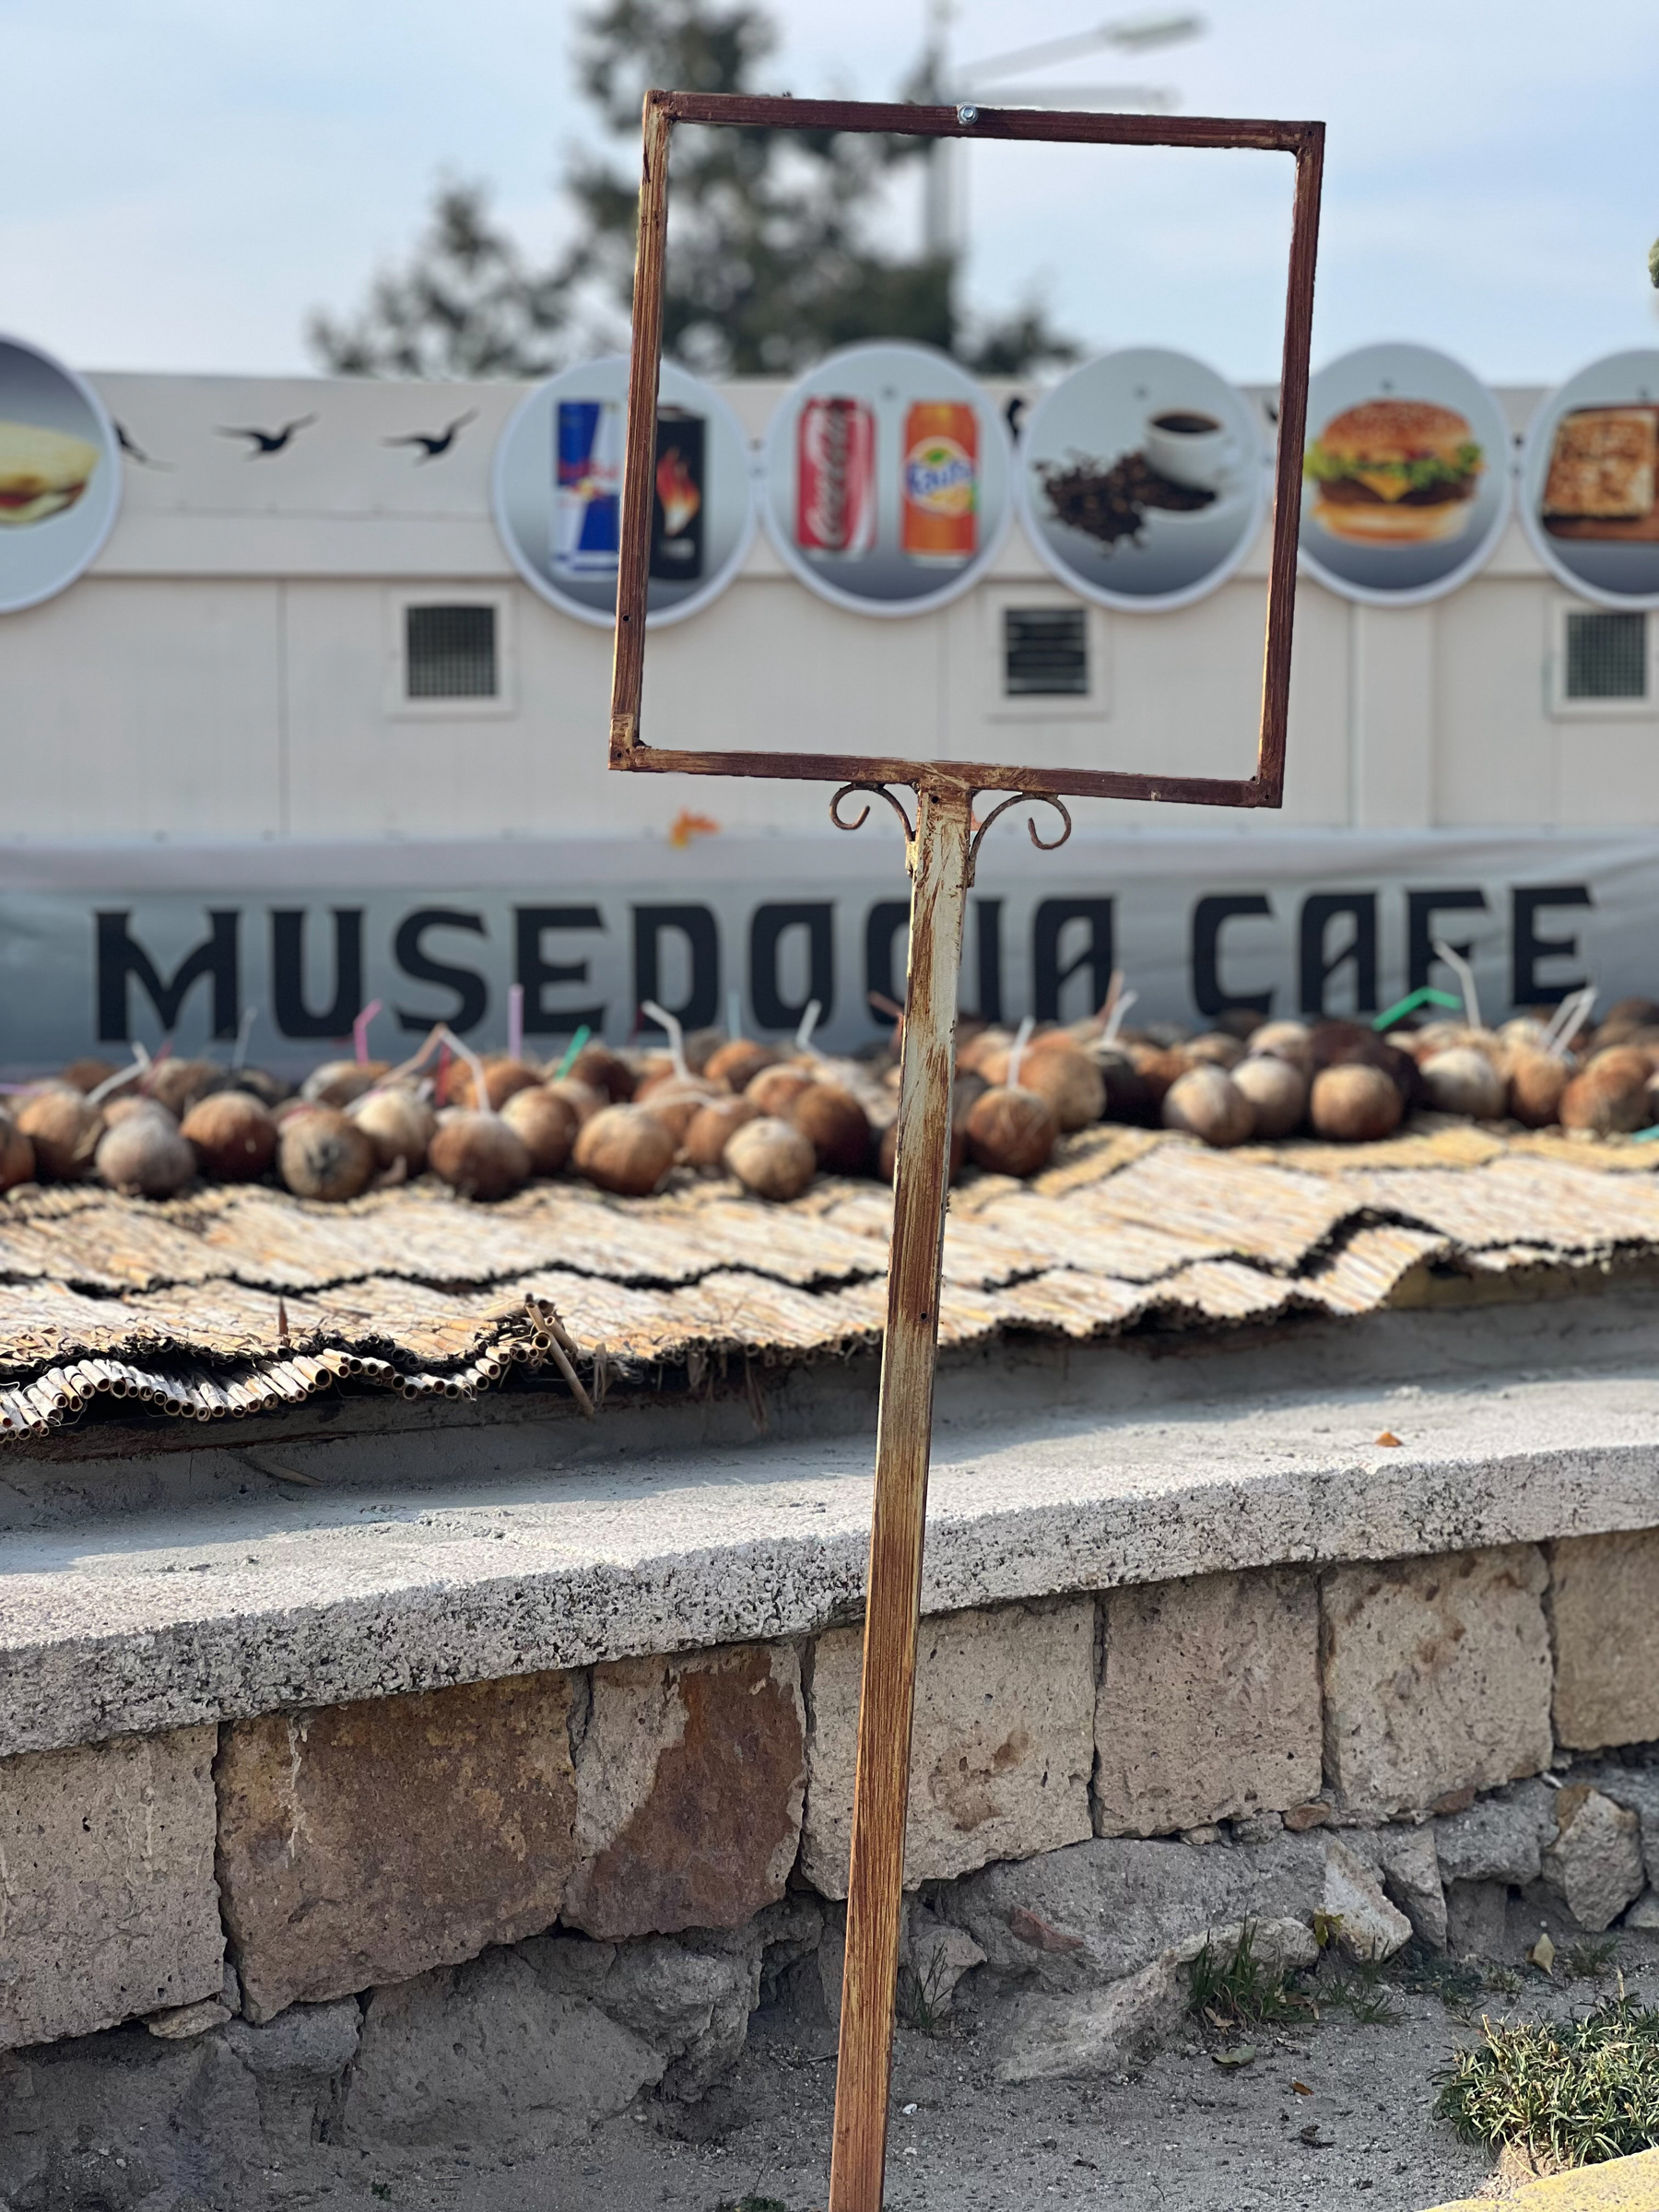 A rusty square metal frame on a stand in front of a café, with a backdrop of advertising dishes and beverages. The café&rsquo;s name, &ldquo;MUSEDOCIA CAFÉ,&rdquo; is partially visible in the background, and coconuts.